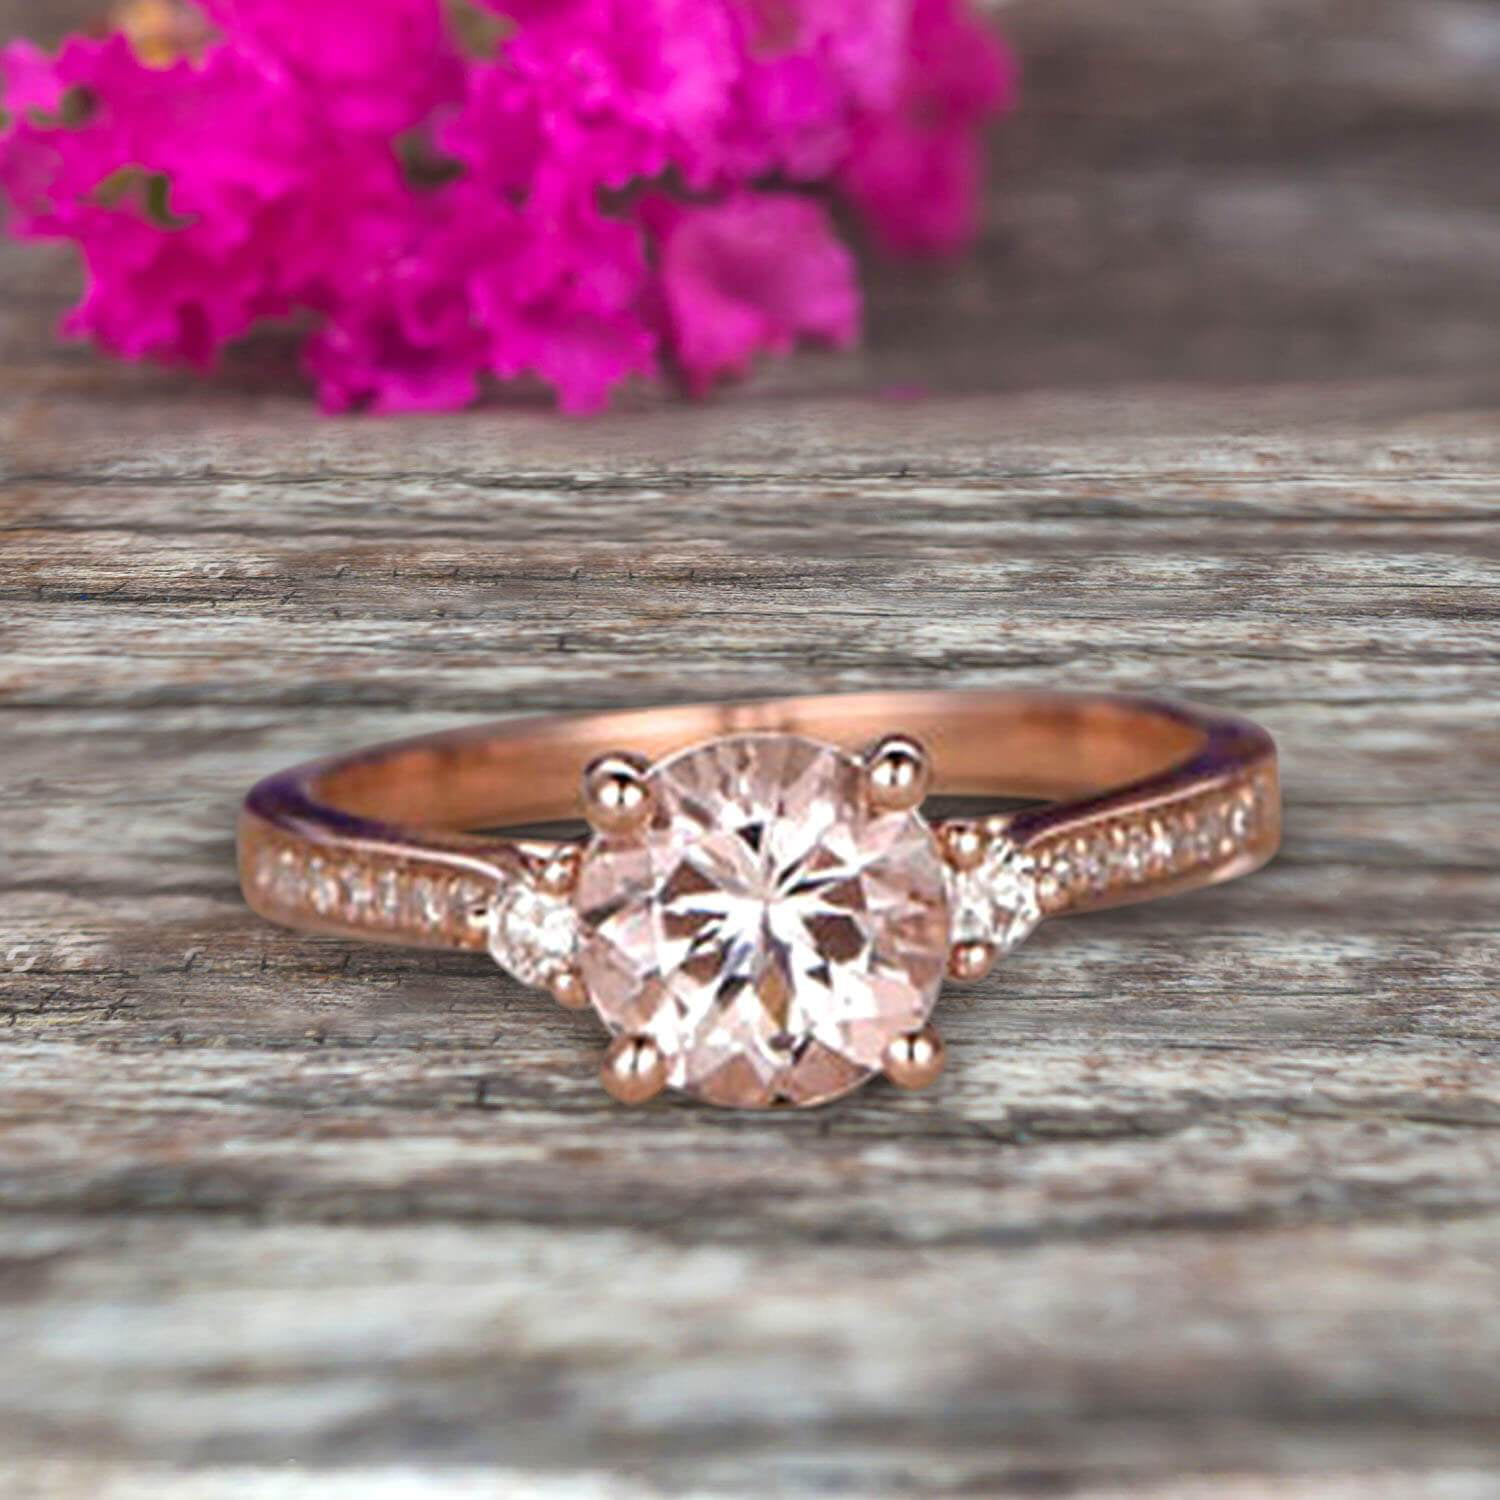 Oval Cut Morganite Ring Solitaire Ring 14k Solid Rose Gold Morganite Engagement Ring 1.70 CT Morganite Engagement Ring Gift for Women